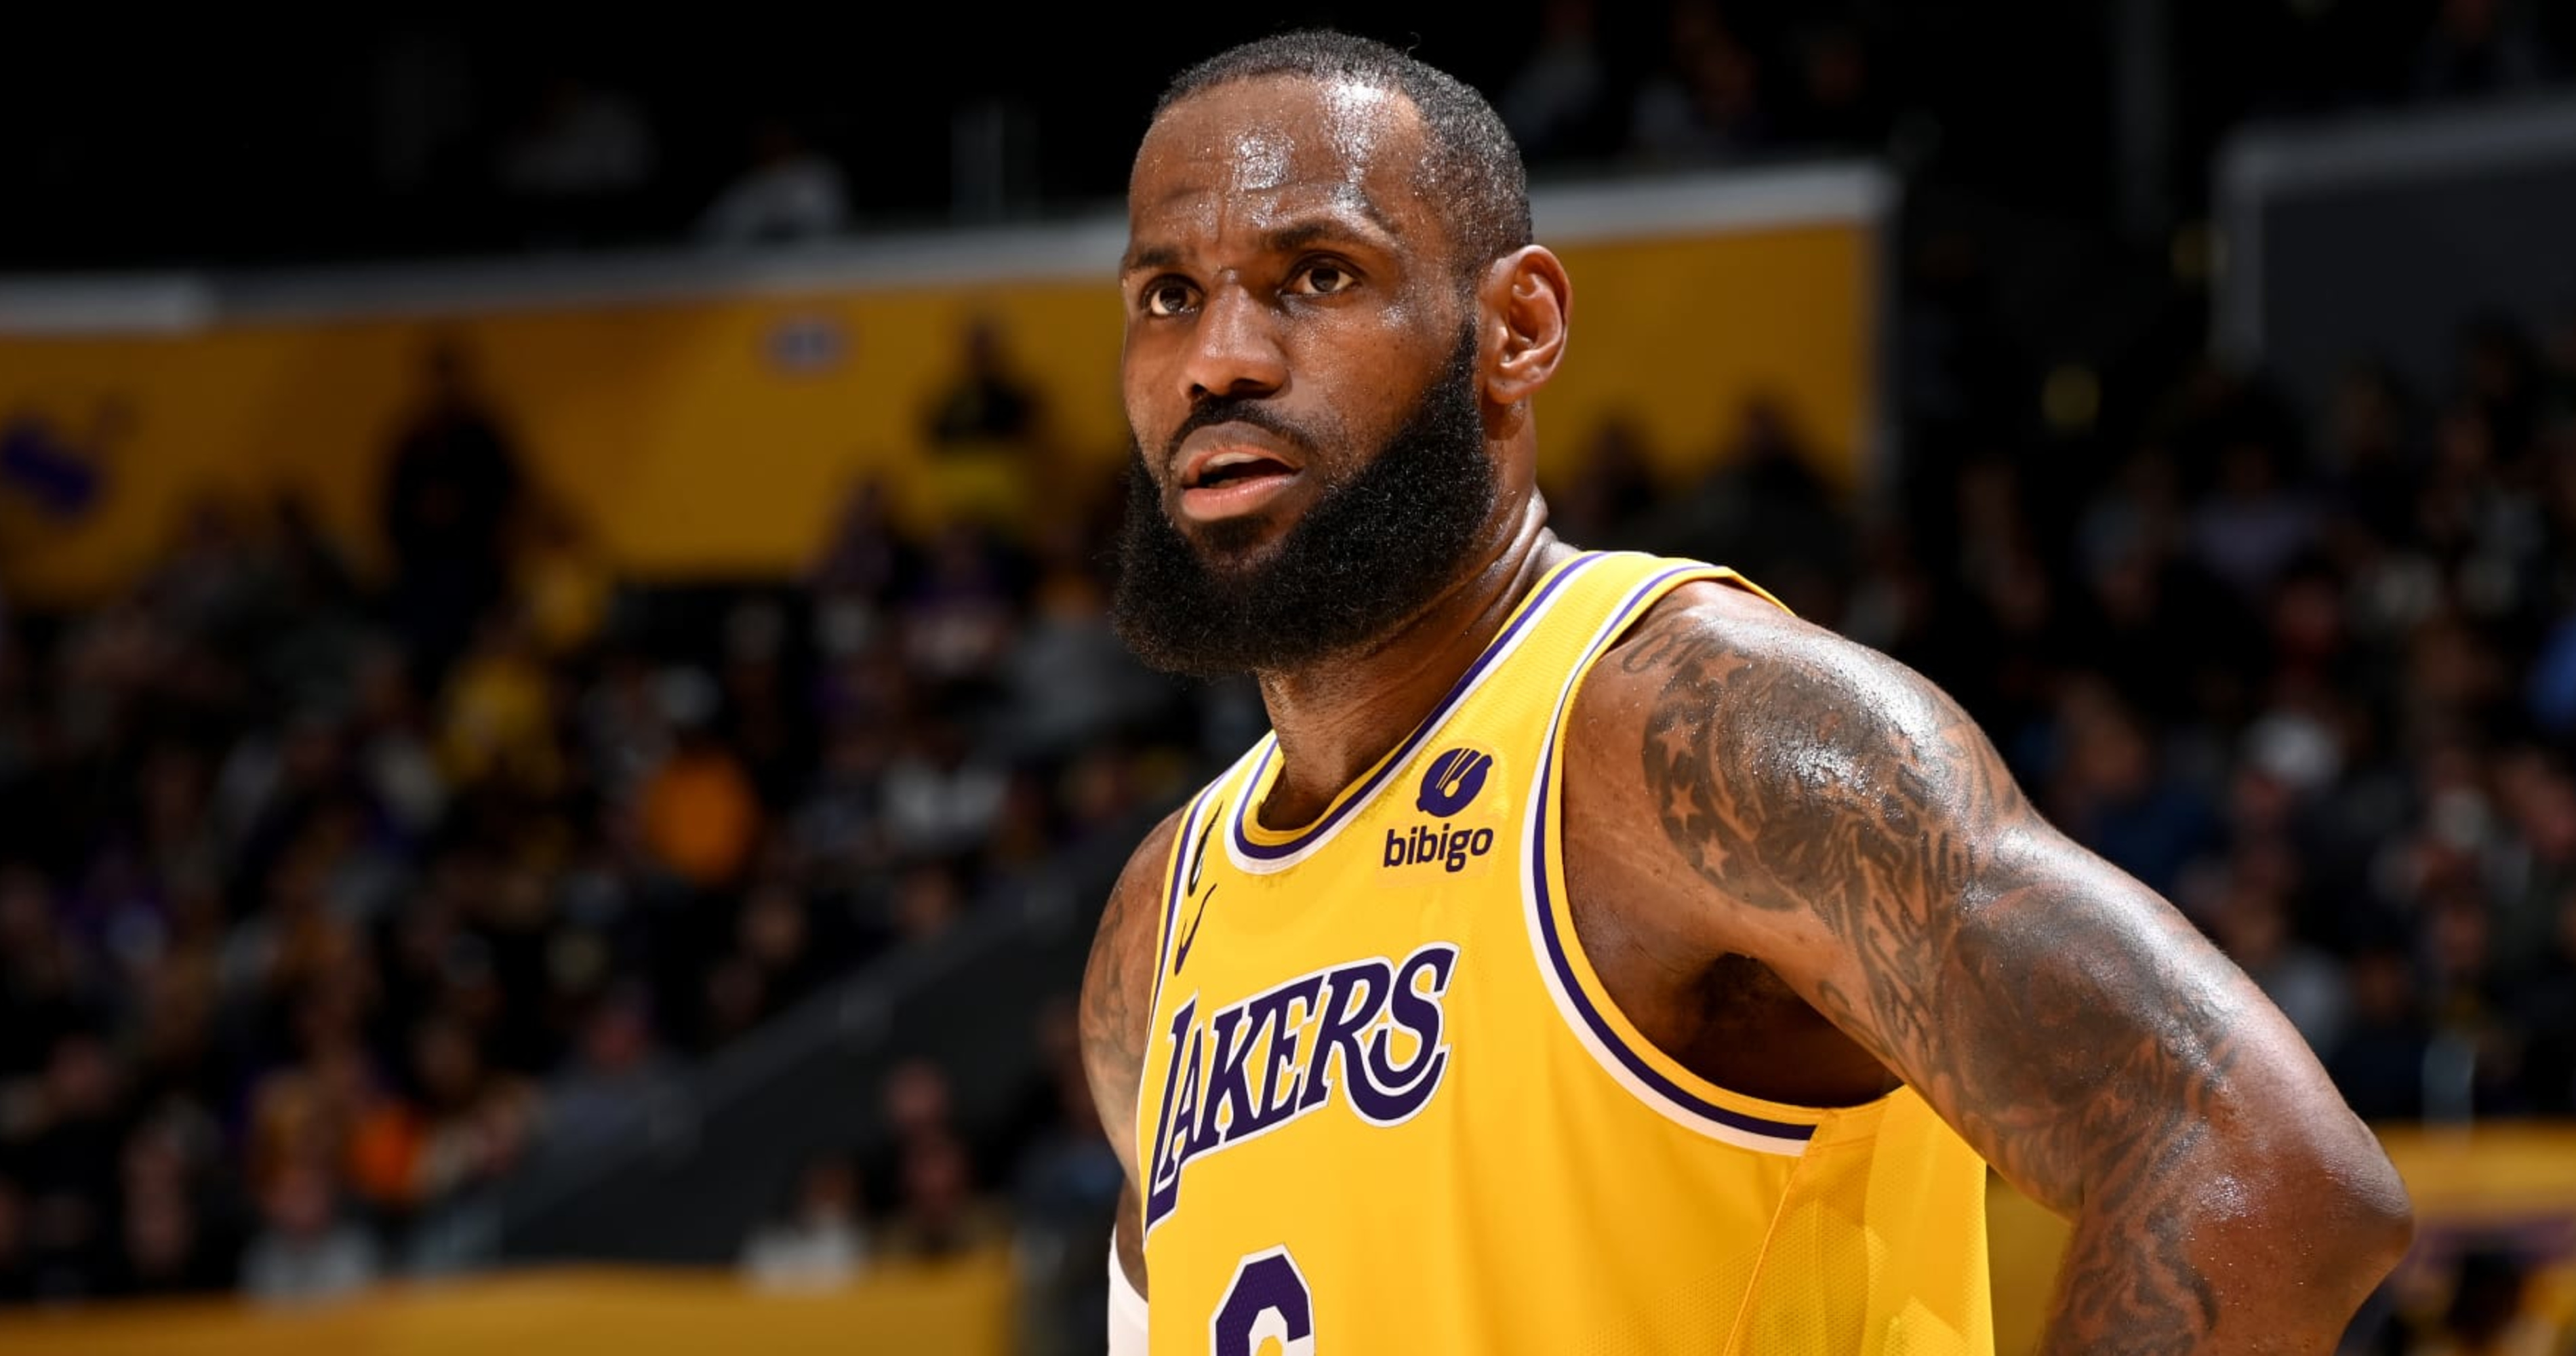 Lakers News: LeBron James makes All NBA third team - Silver Screen and Roll